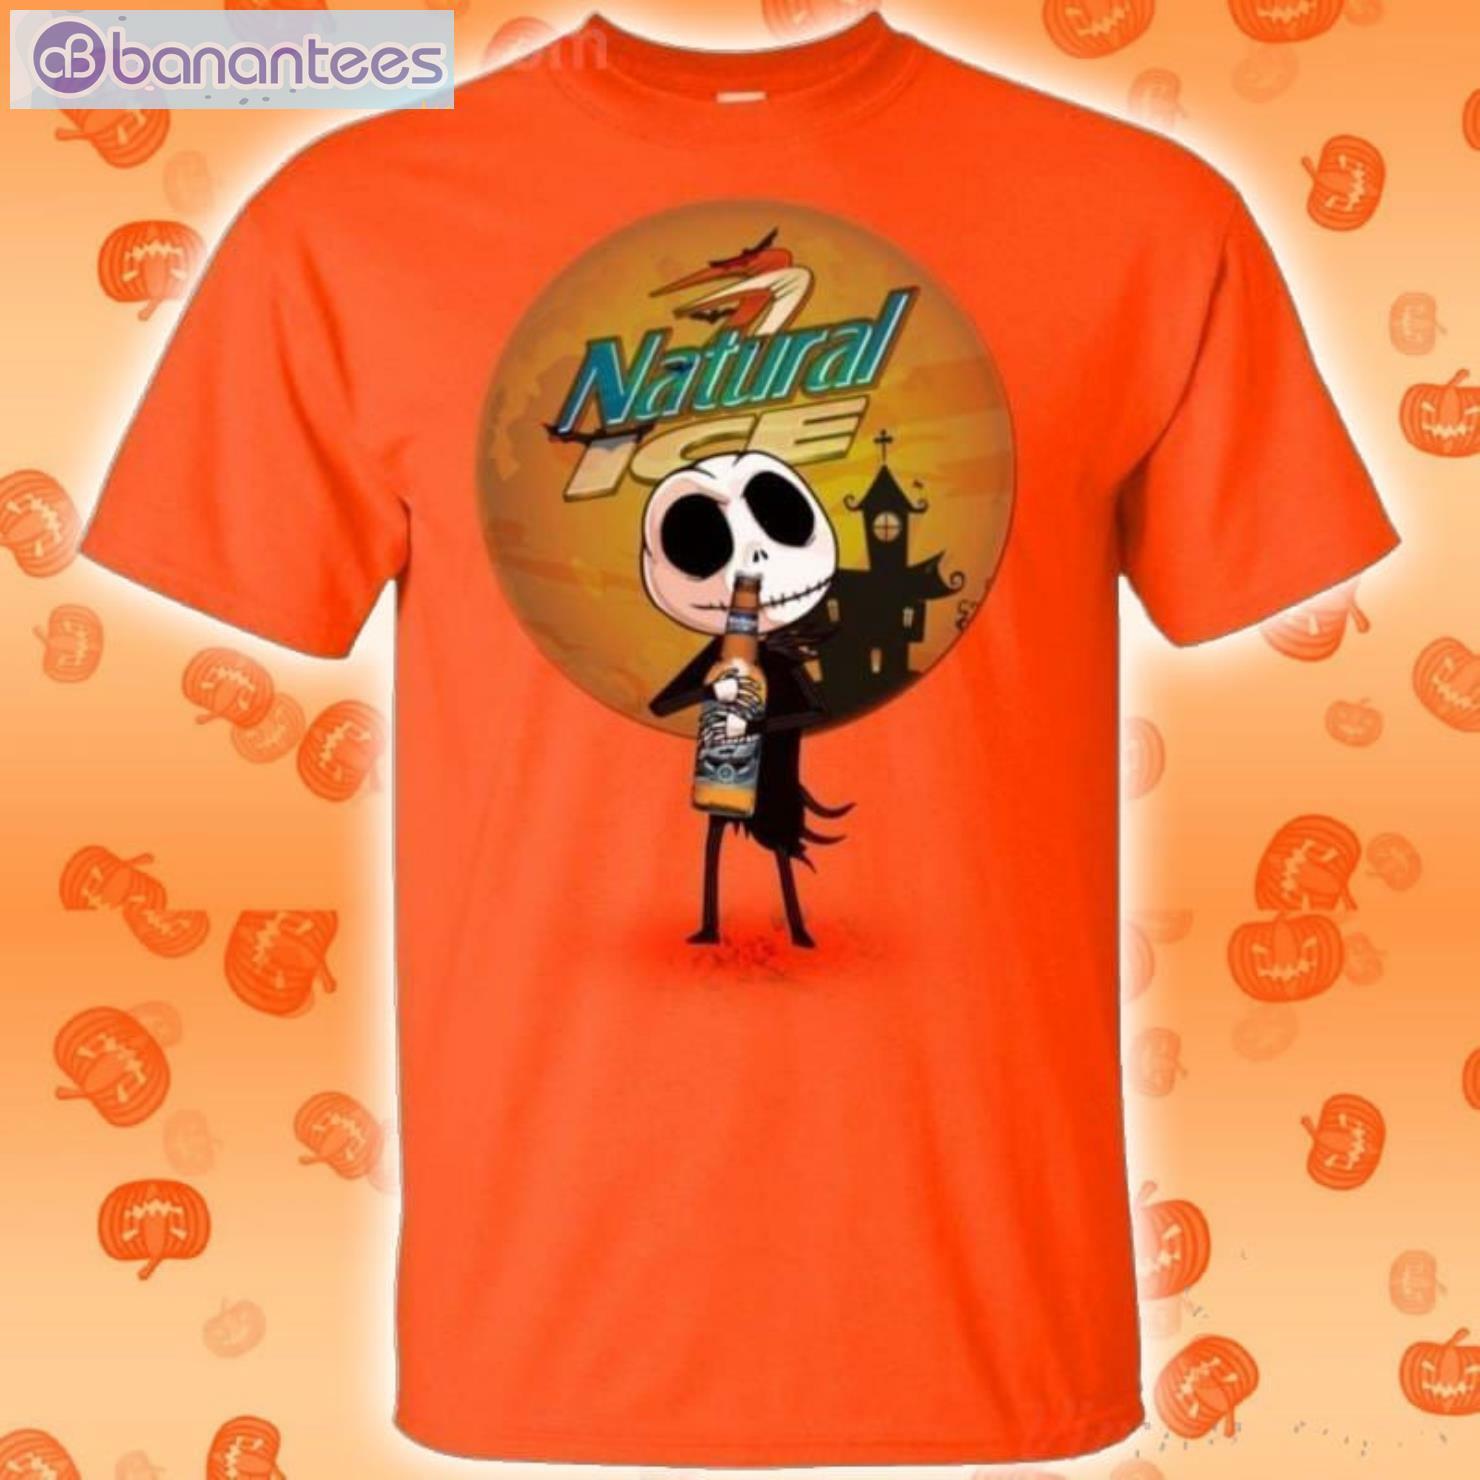 Jack Skellington Hold Natural Ice Beer Halloween T-Shirt Product Photo 2 Product photo 2